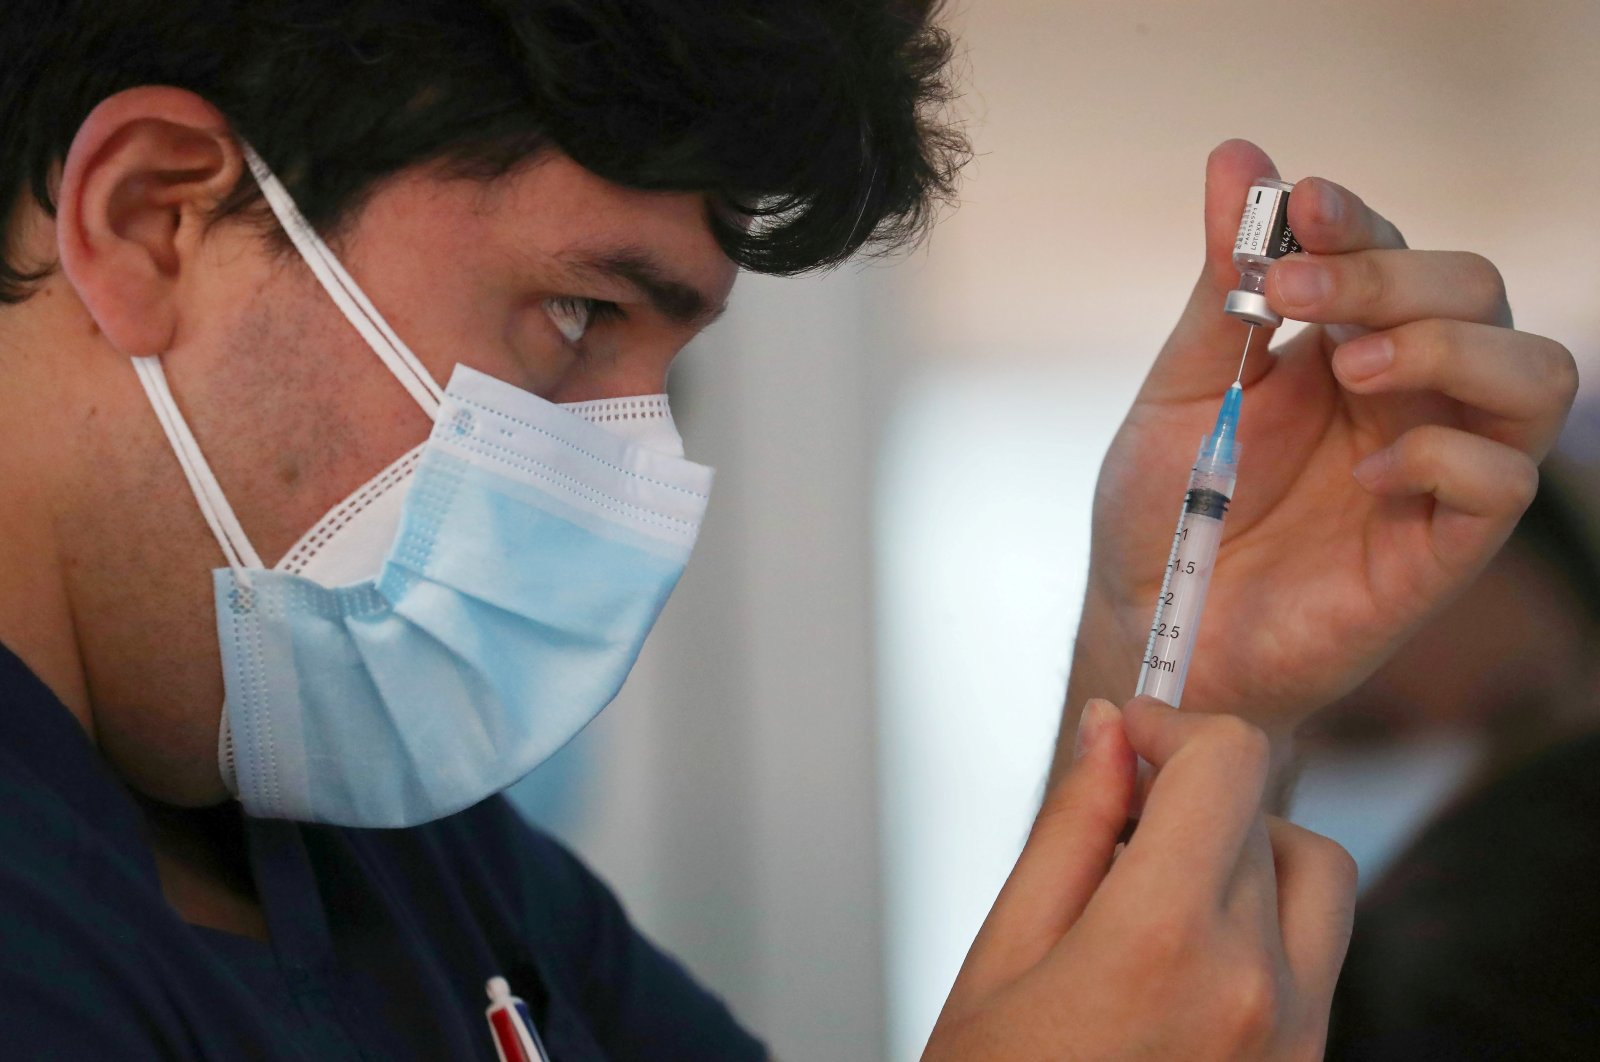 A health care worker prepares a dose of the Pfizer/BioNtech vaccine against the coronavirus disease (COVID-19) at the Posta Central hospital in Santiago, Chile, Dec. 24, 2020. (Reuters Photo)